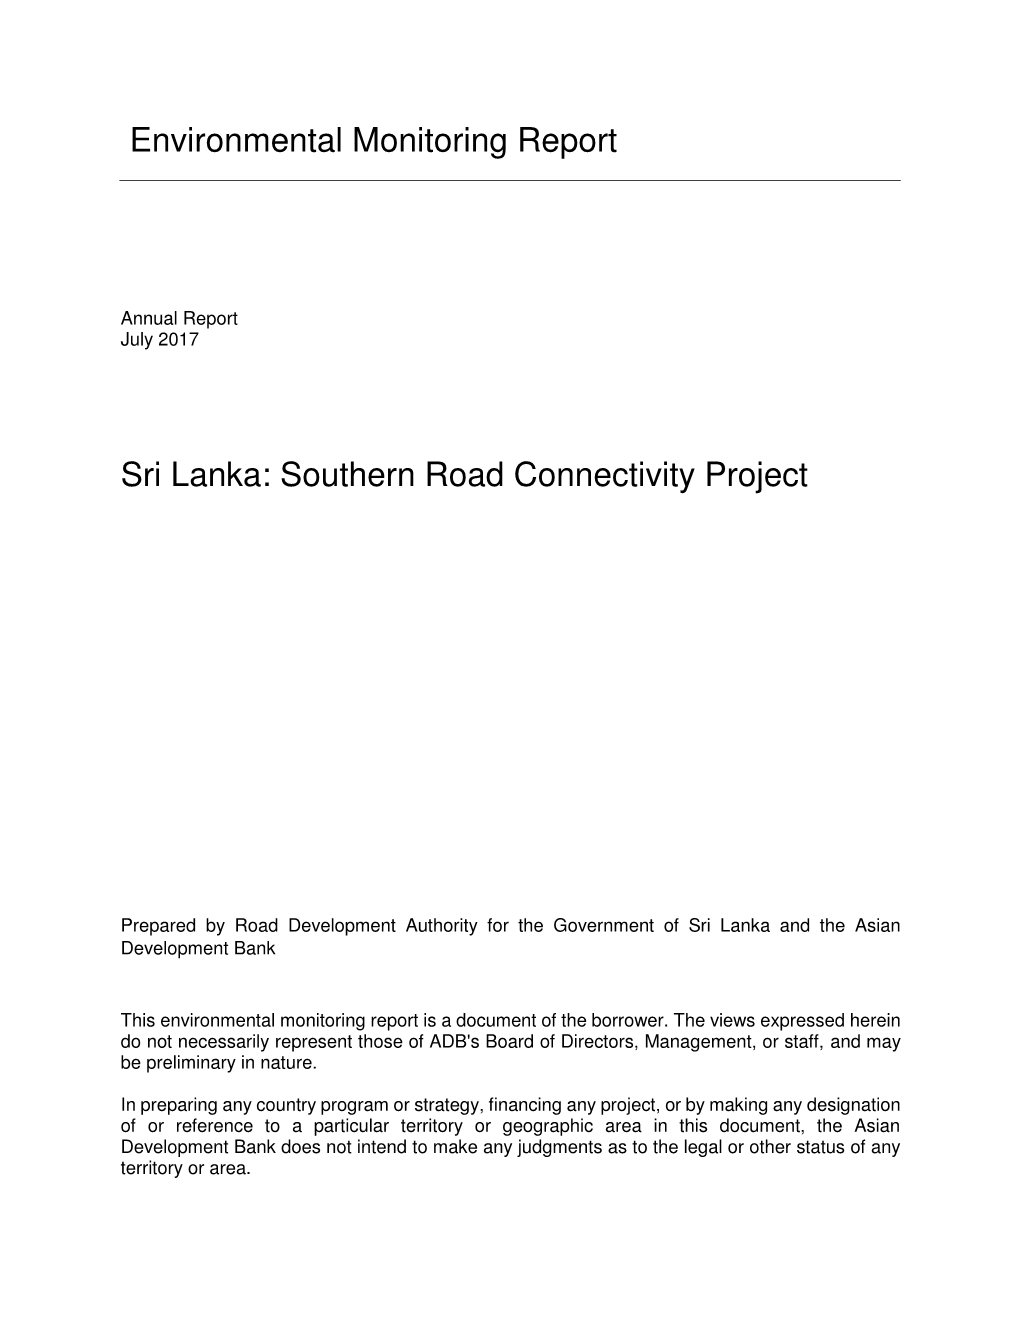 Outline of a Project Environmental Progress and Monitoring Report